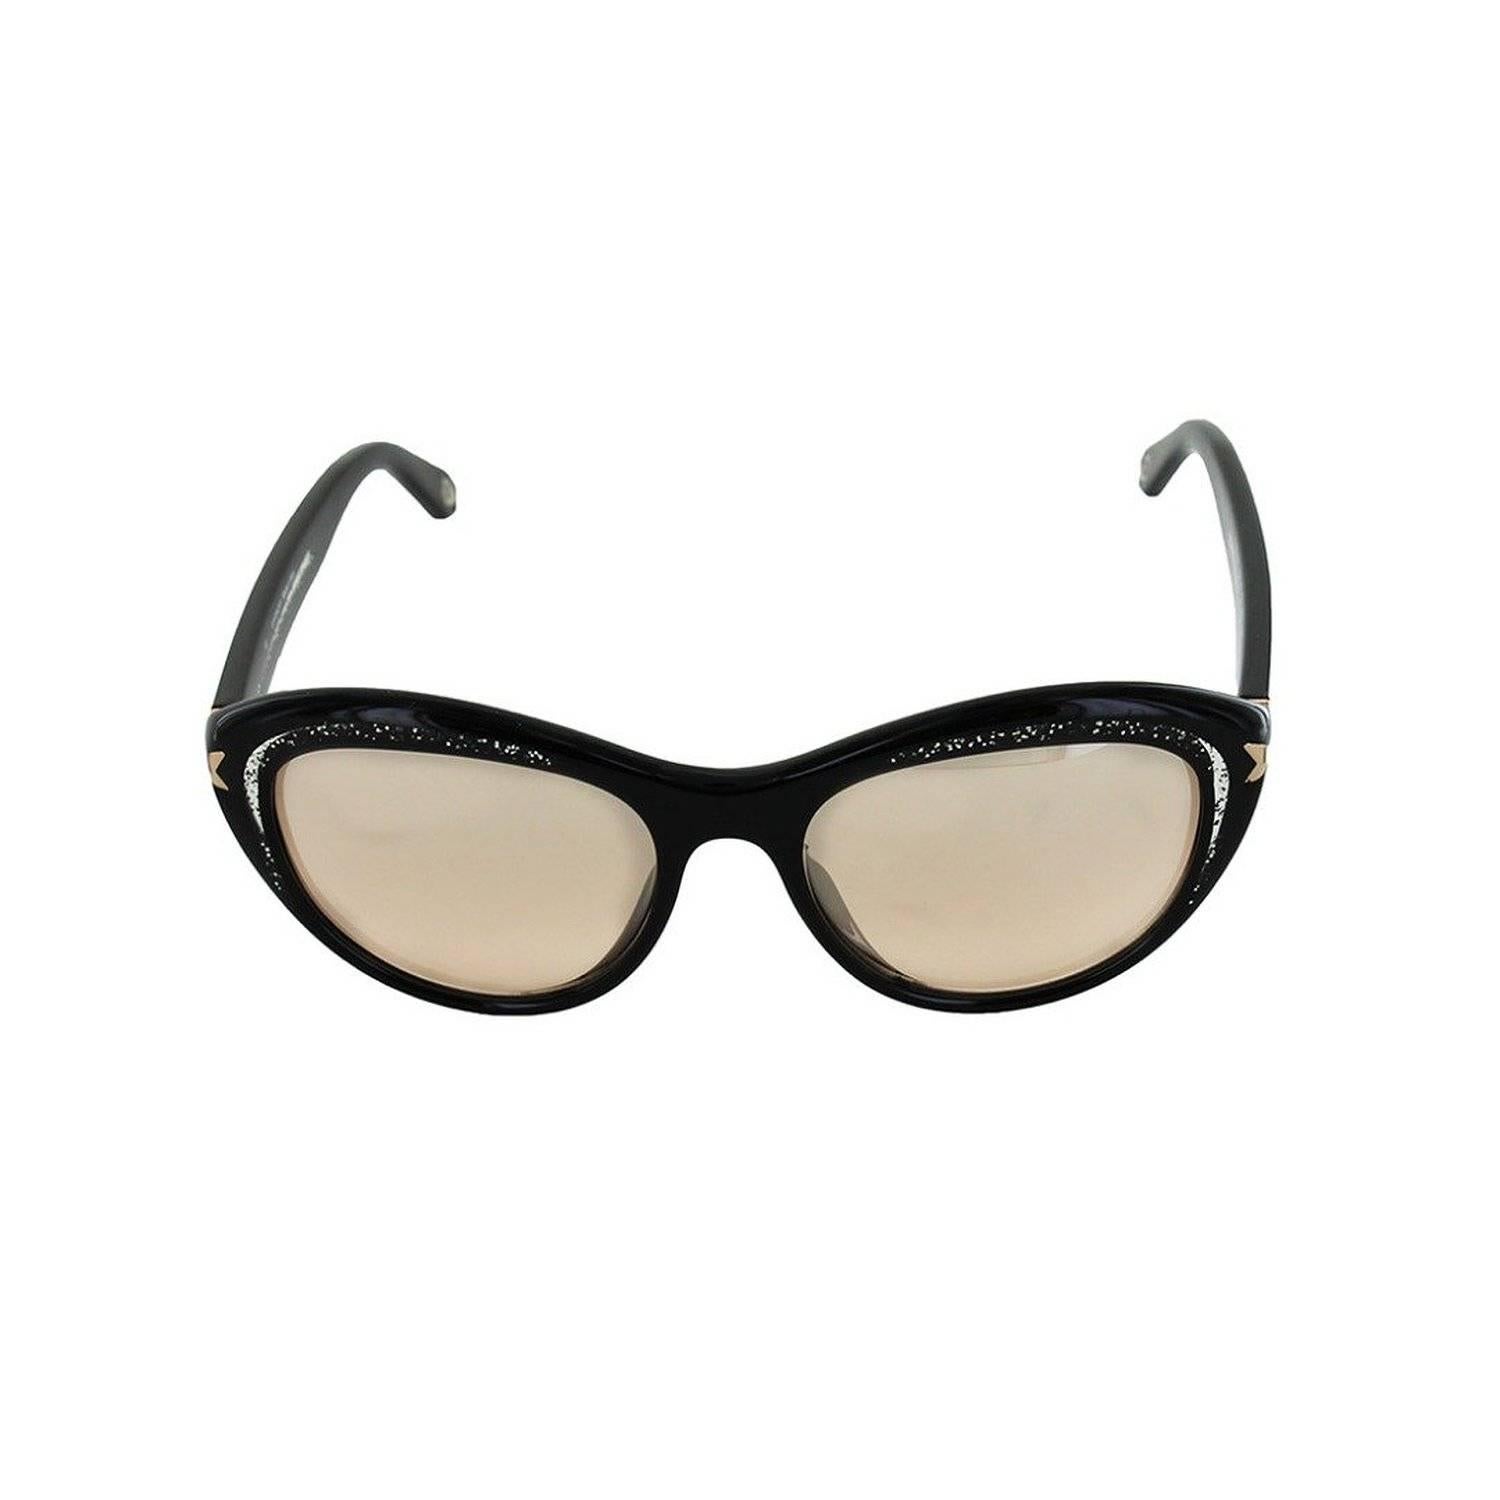 Givenchy SGV 931 975X Black Cat Eye Sunglasses In New Condition For Sale In Los Angeles, CA